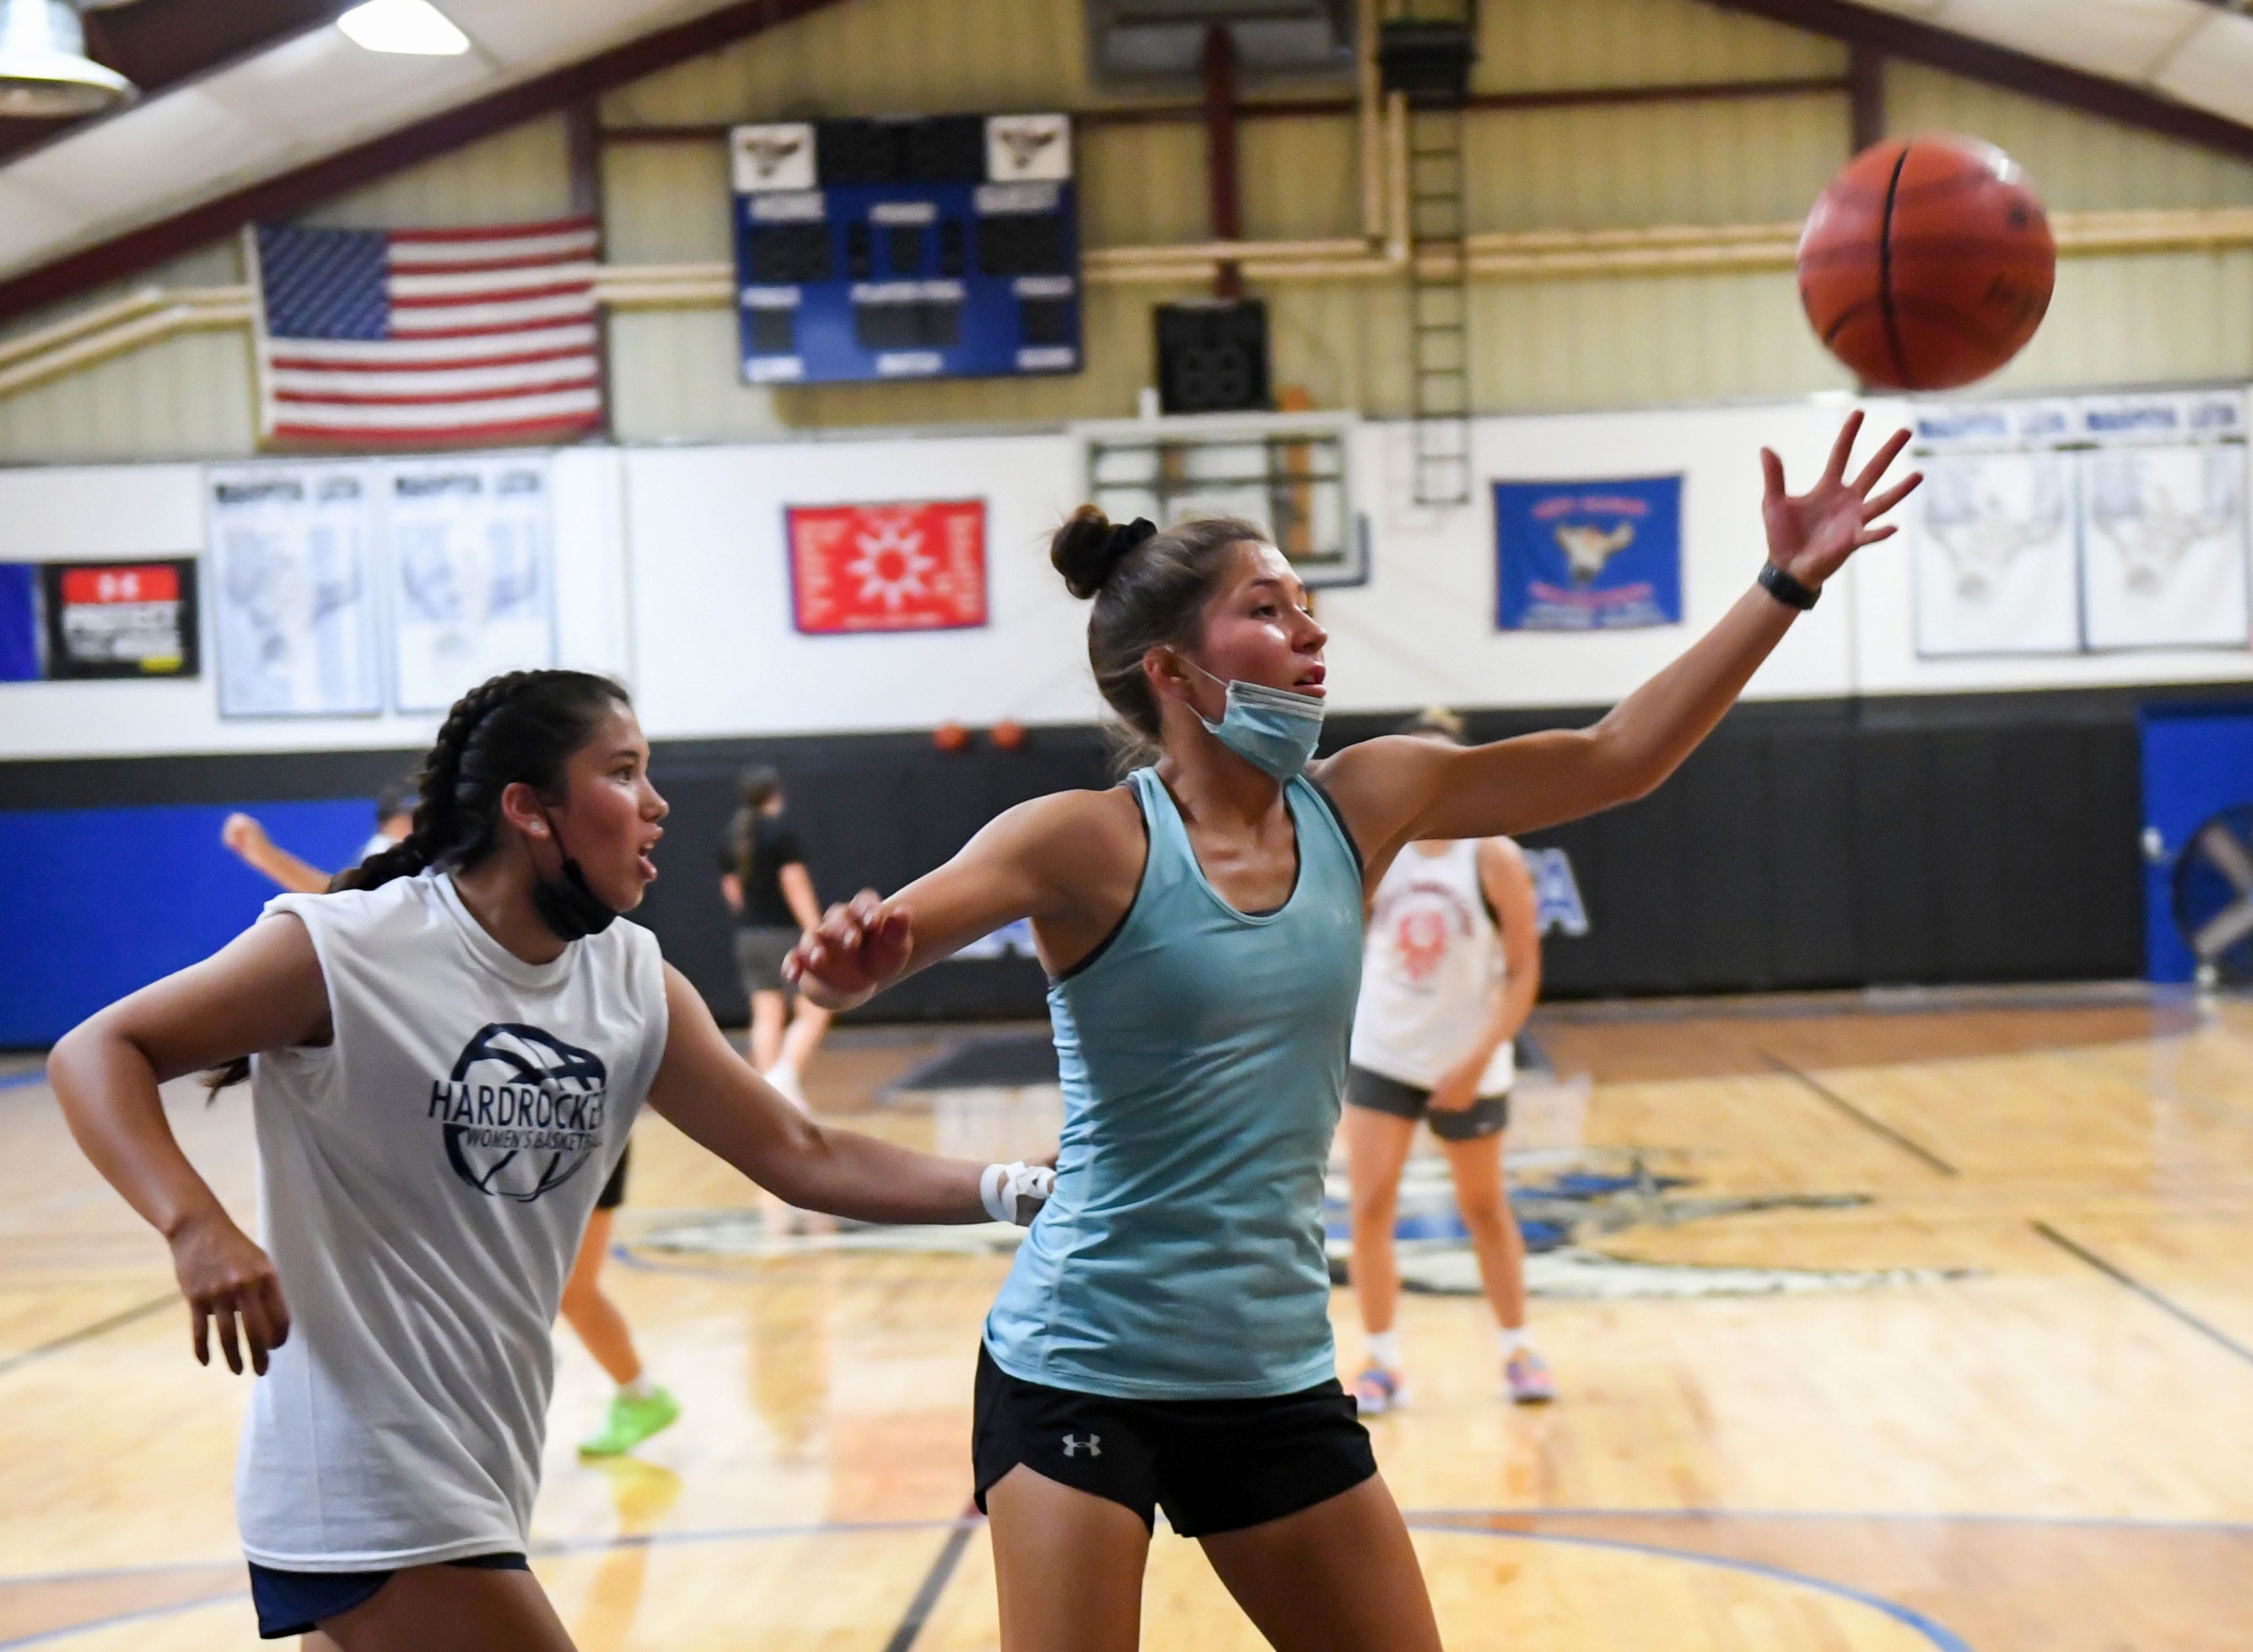 Red Cloud's Jade Ecoffey reaches for the basketball during practice on Tuesday, June 15, 2021, on the Pine Ridge Reservation.